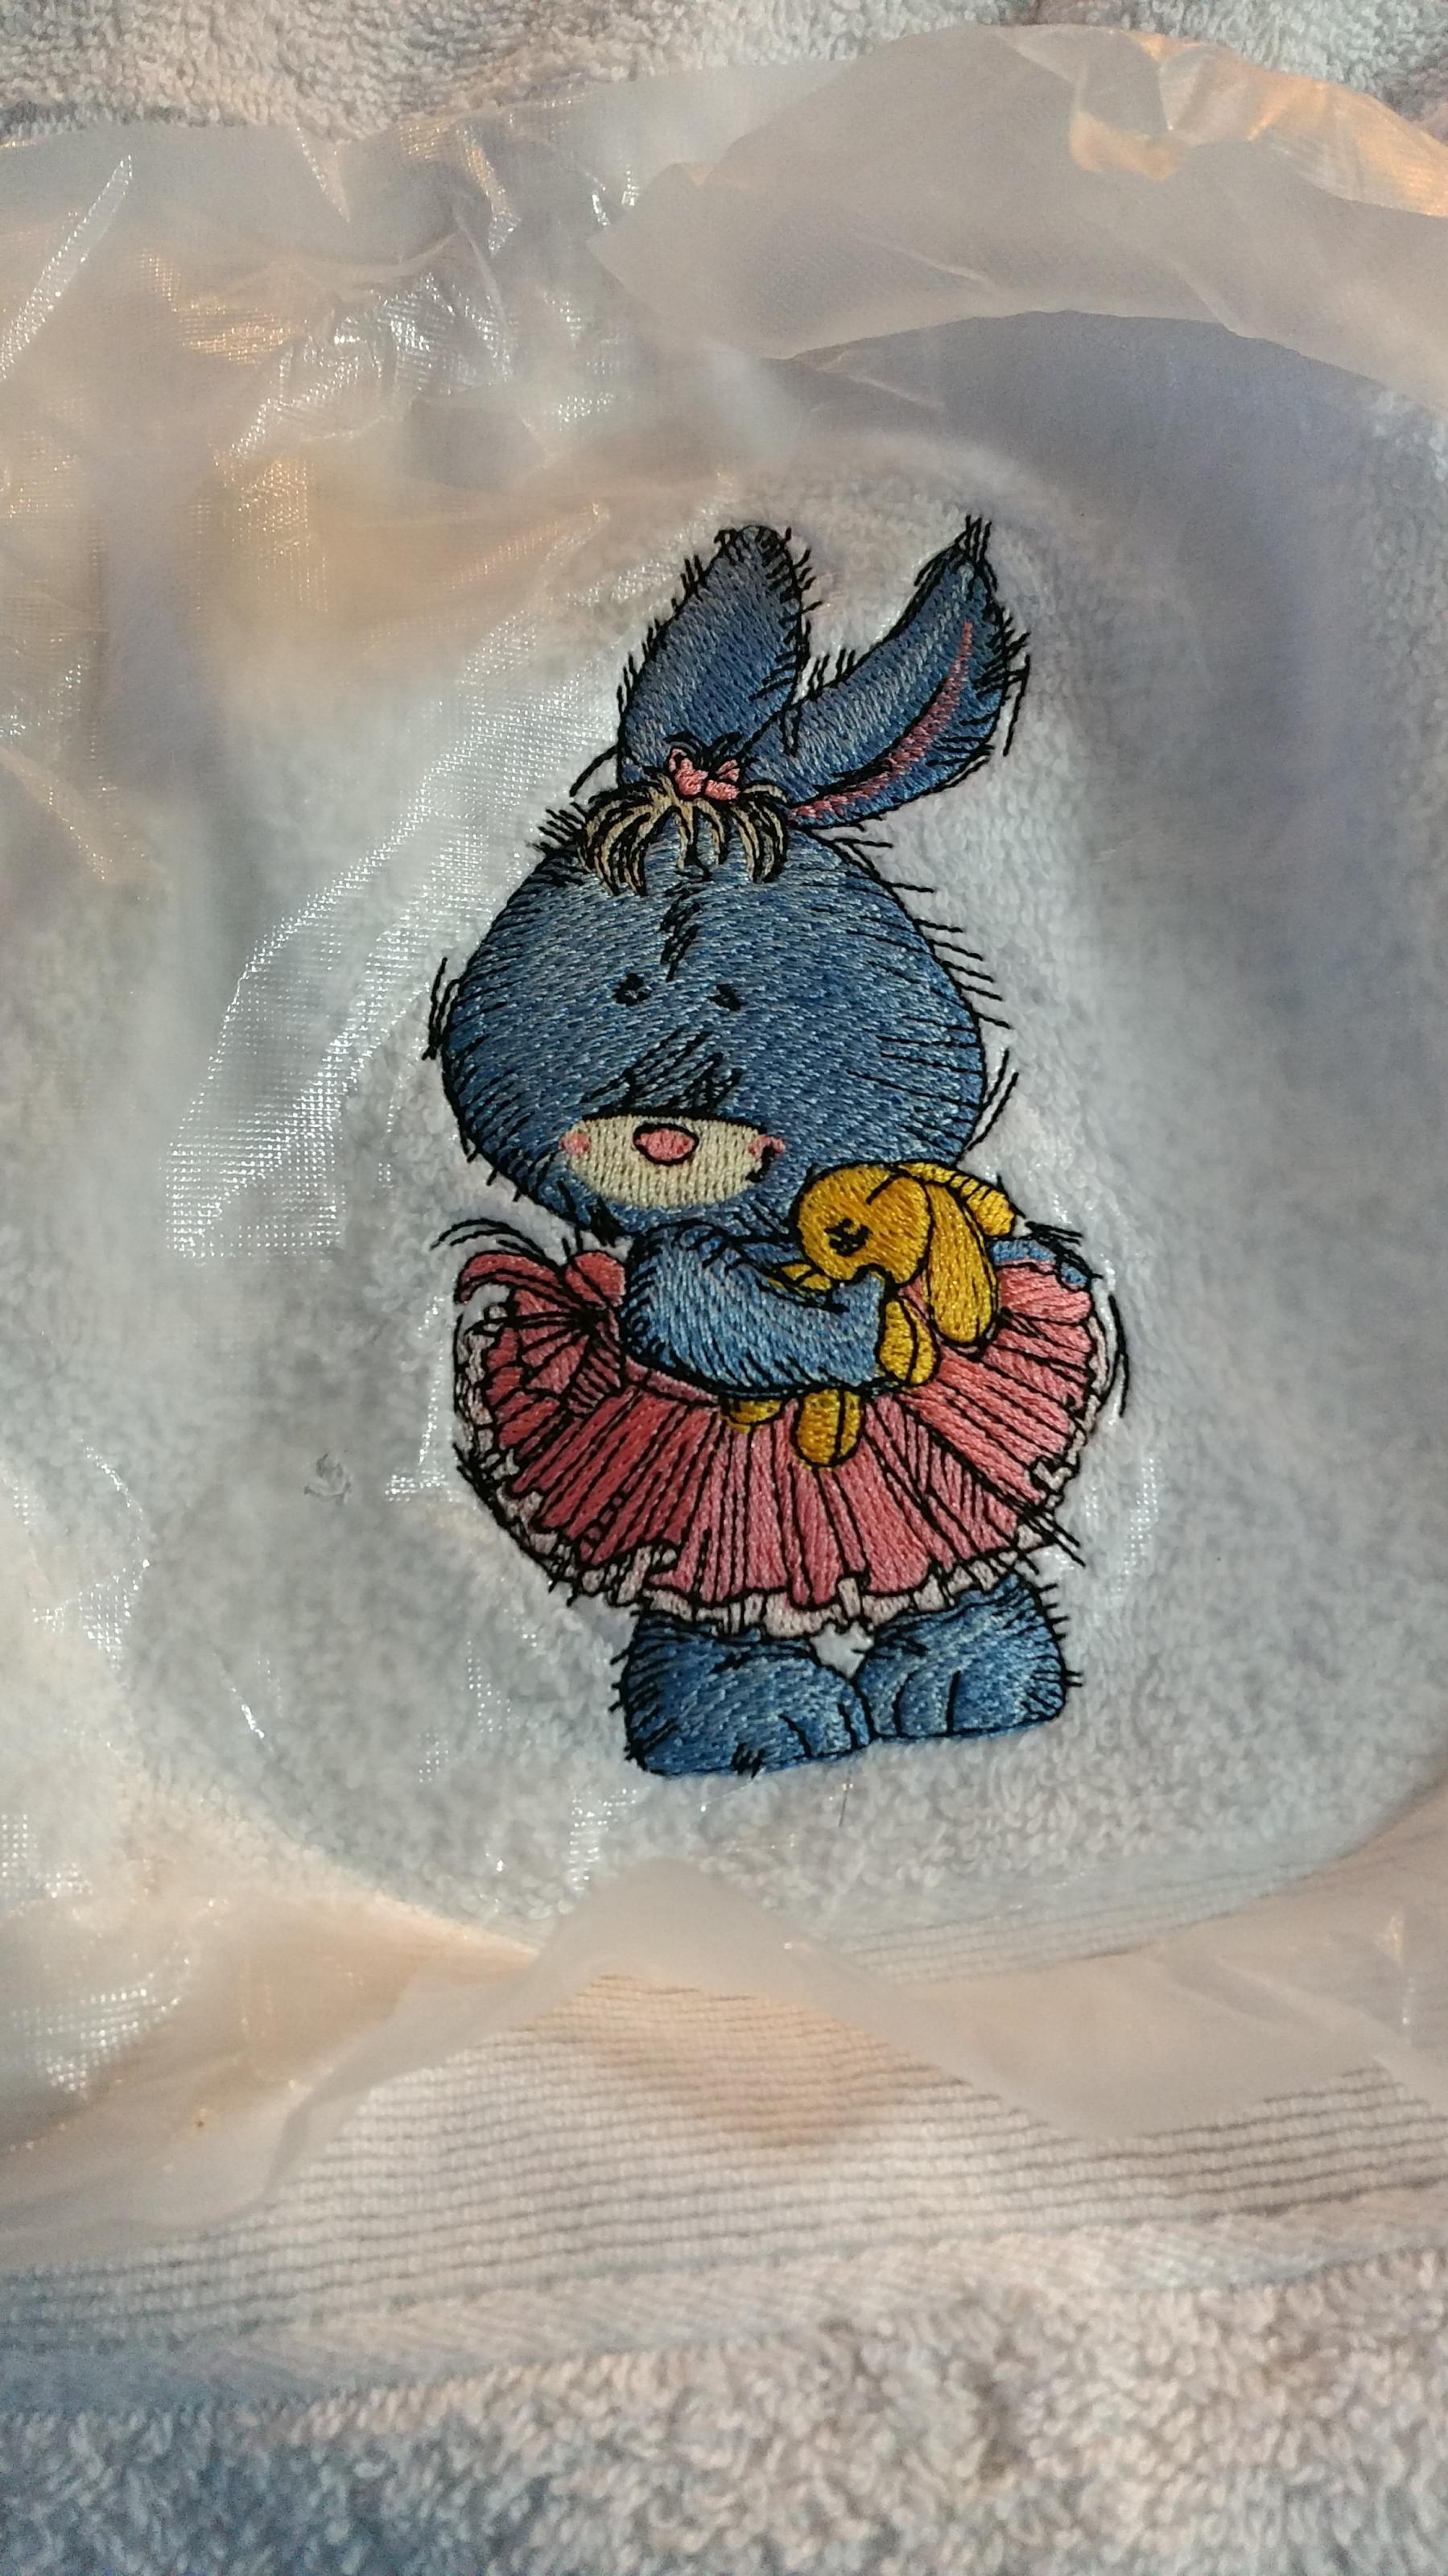 Making bunny in tutu skirt embroidery design